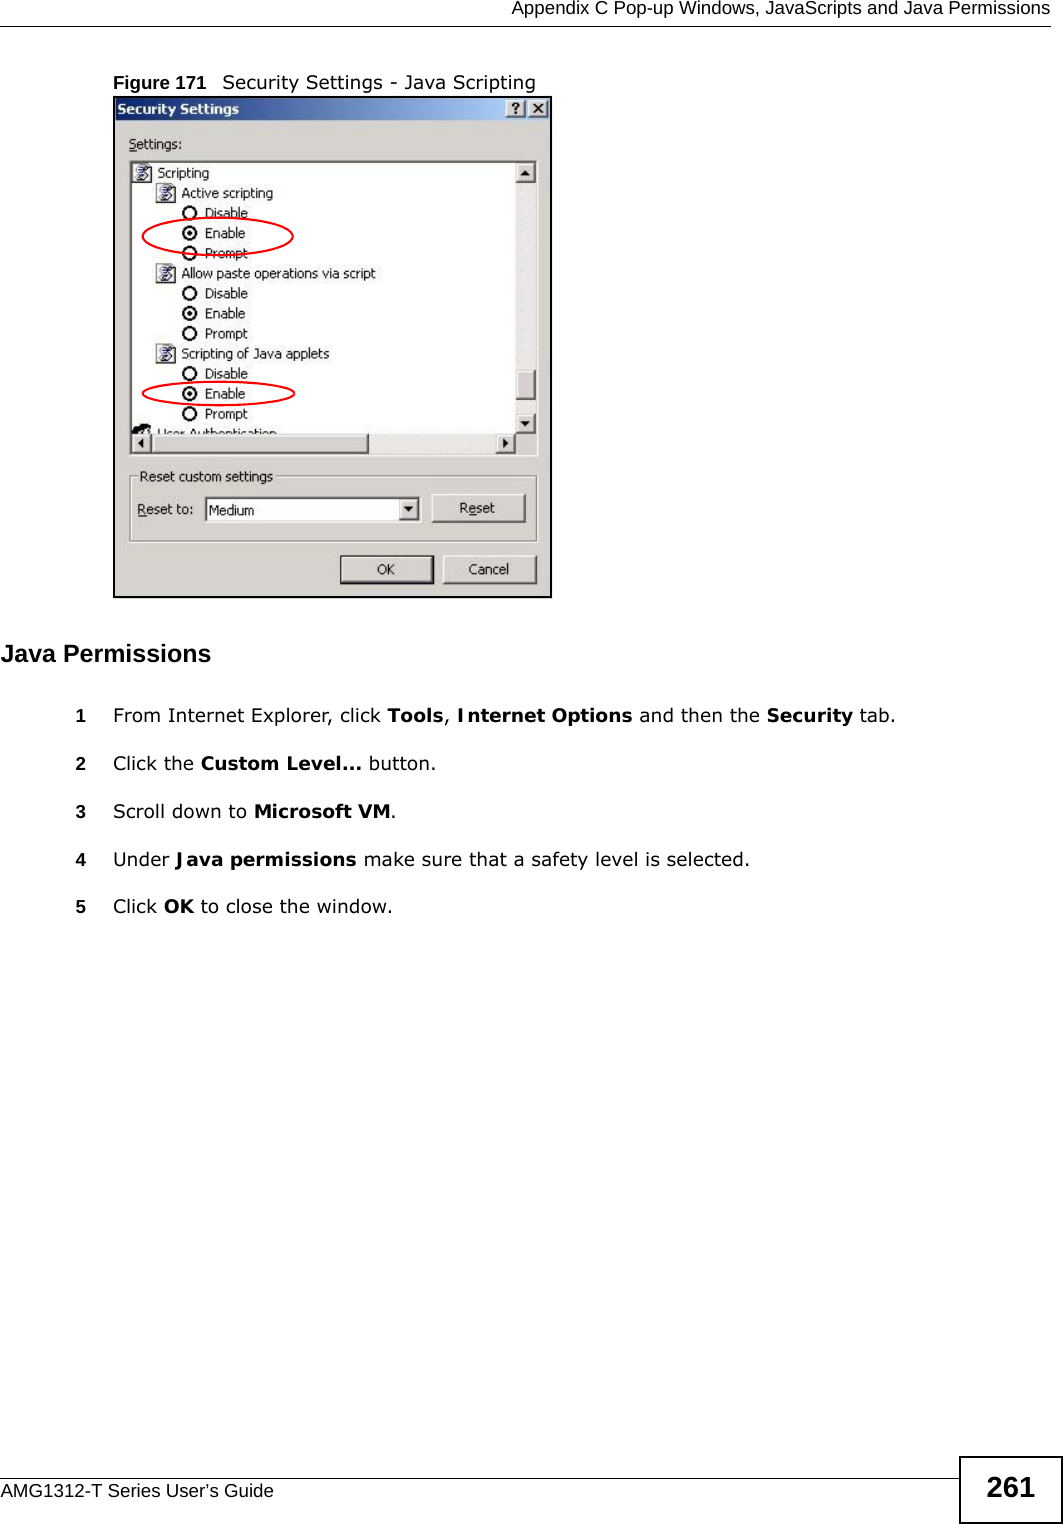  Appendix C Pop-up Windows, JavaScripts and Java PermissionsAMG1312-T Series User’s Guide 261Figure 171   Security Settings - Java ScriptingJava Permissions1From Internet Explorer, click Tools, Internet Options and then the Security tab. 2Click the Custom Level... button. 3Scroll down to Microsoft VM. 4Under Java permissions make sure that a safety level is selected.5Click OK to close the window.